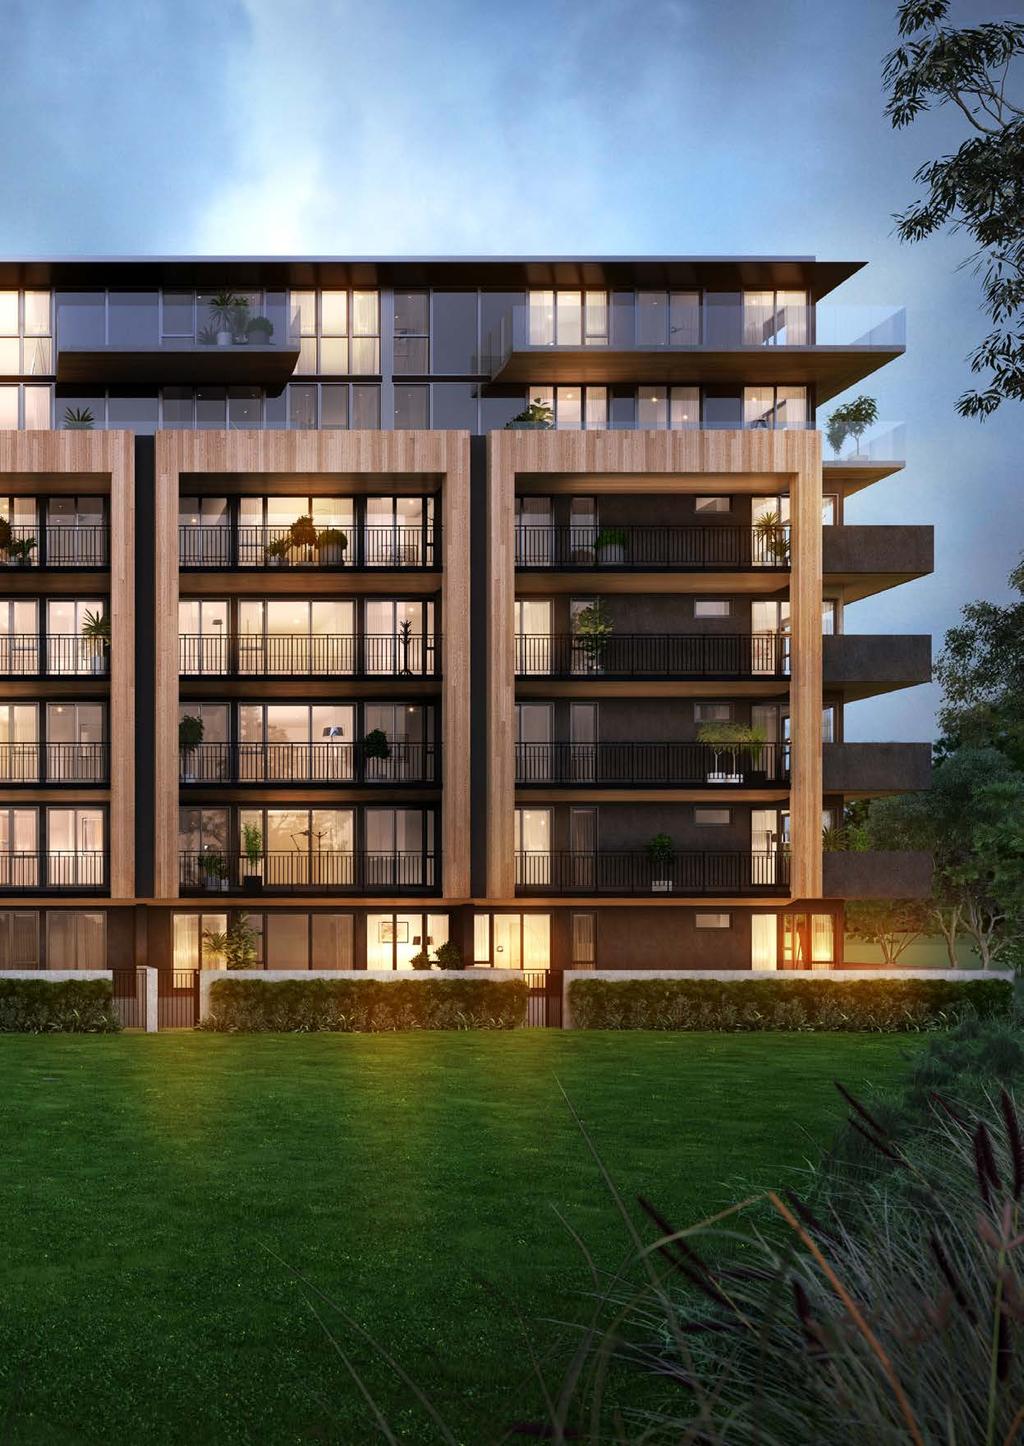 PROUDLY BROUGHT TO YOU BY 94 FEET FRANKIE IS A STUNNING RESIDENTIAL DEVELOPMENT ON THE LEAFY FRINGE OF MELBOURNE S CBD.